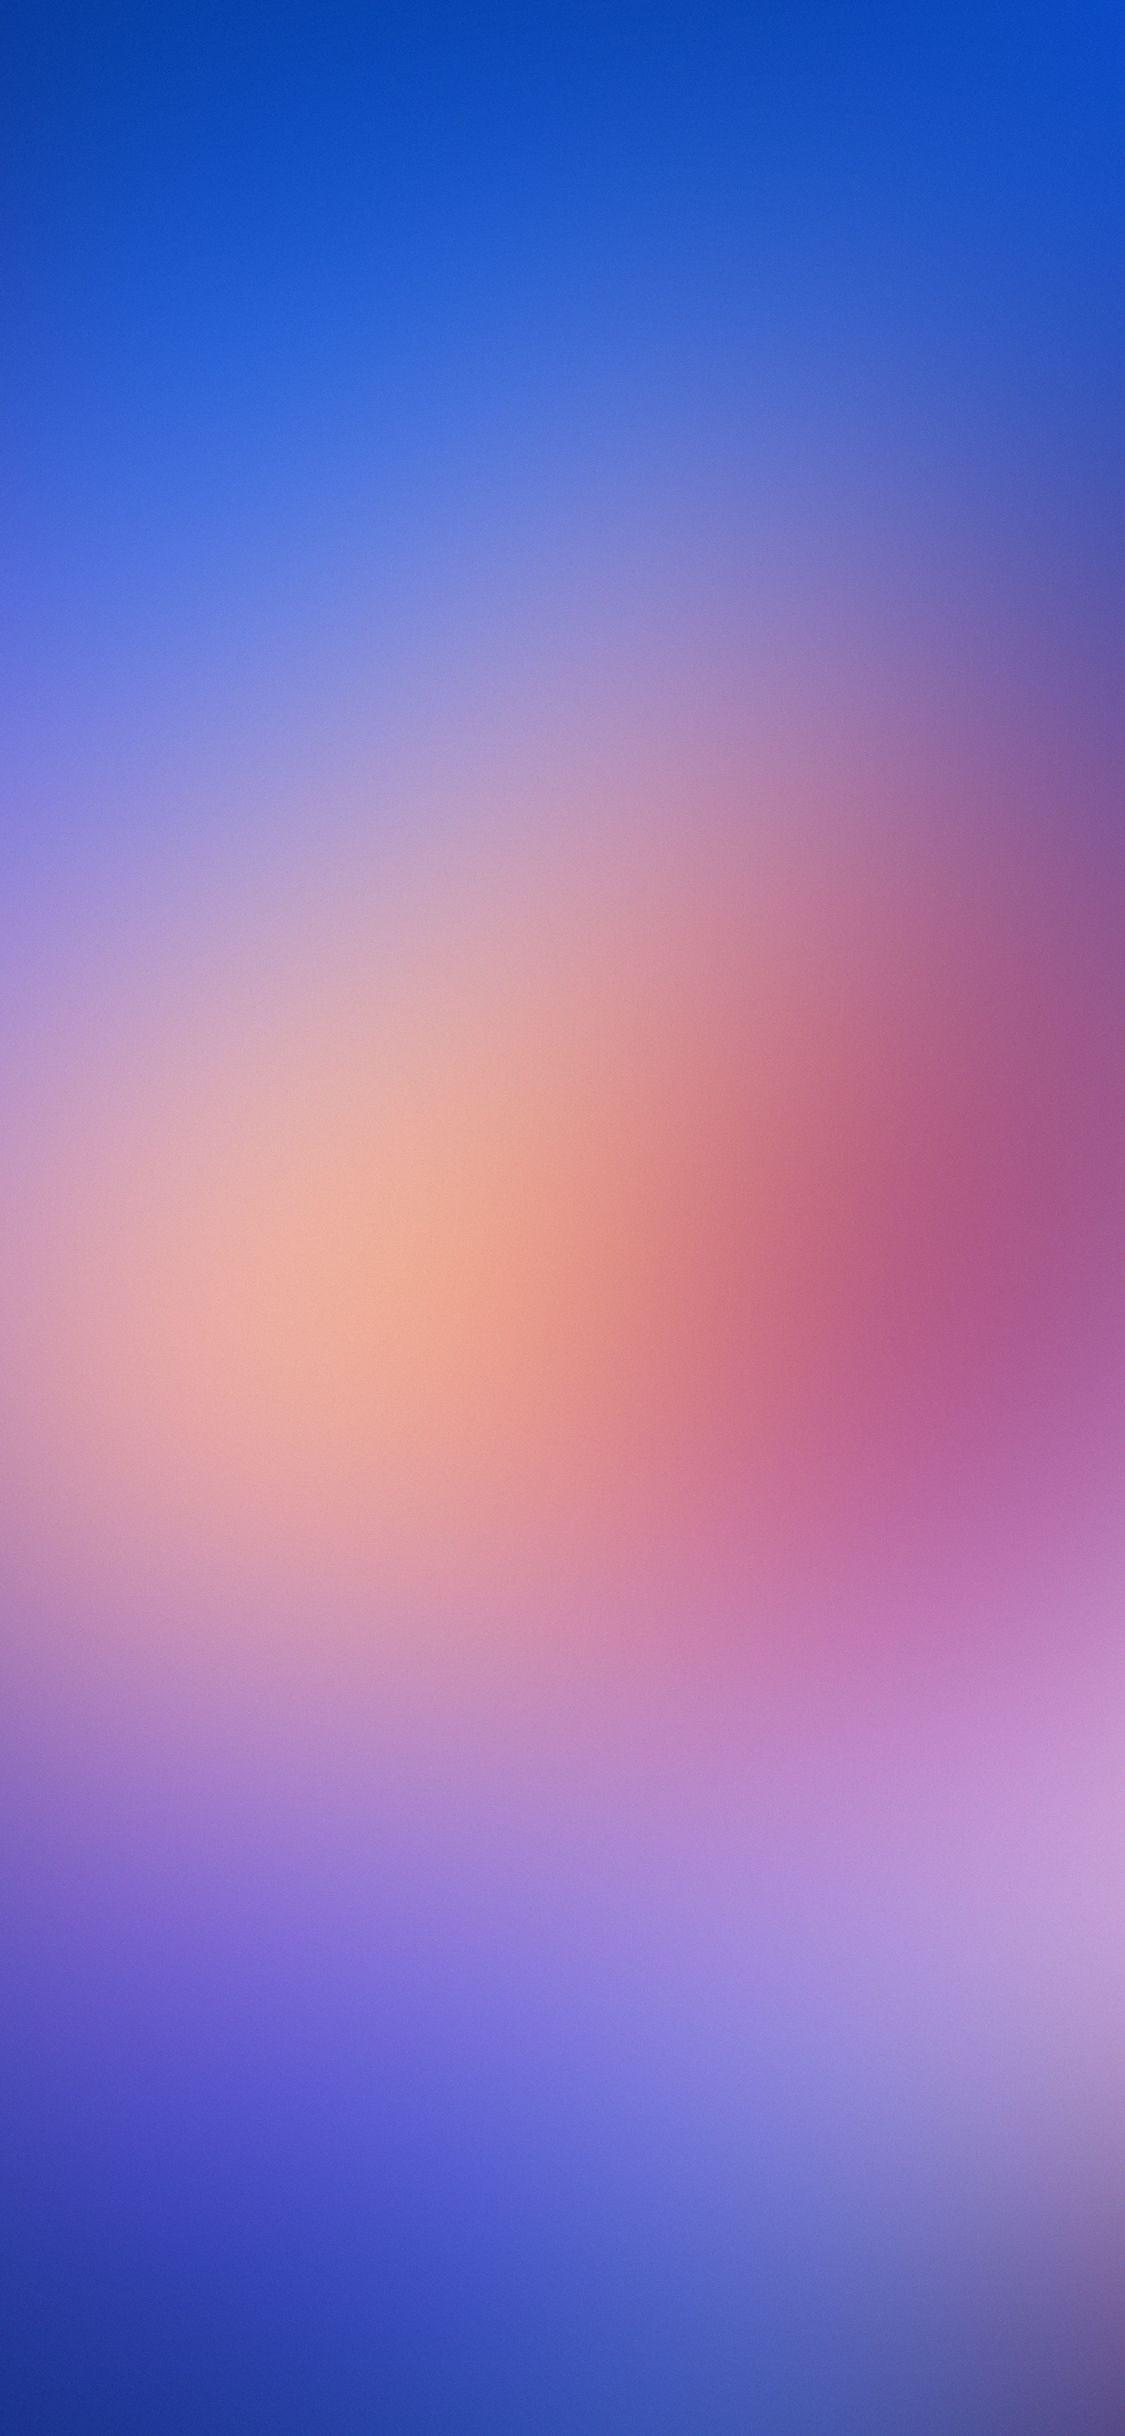 Blur iPhone Wallpapers - Top Free Blur iPhone Backgrounds - WallpaperAccess